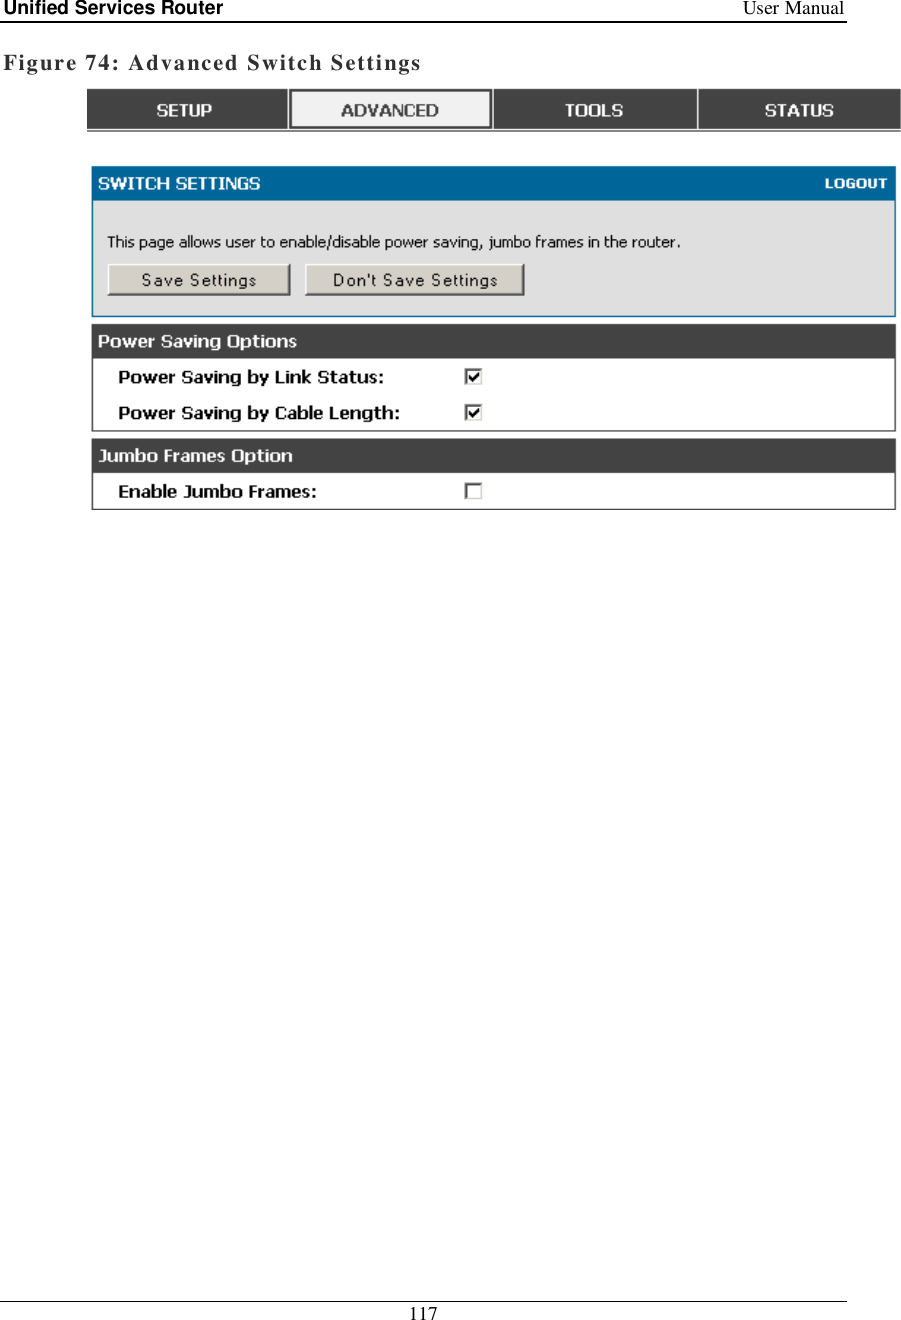 Unified Services Router   User Manual 117  Figure 74: Advanced Switch Settings    